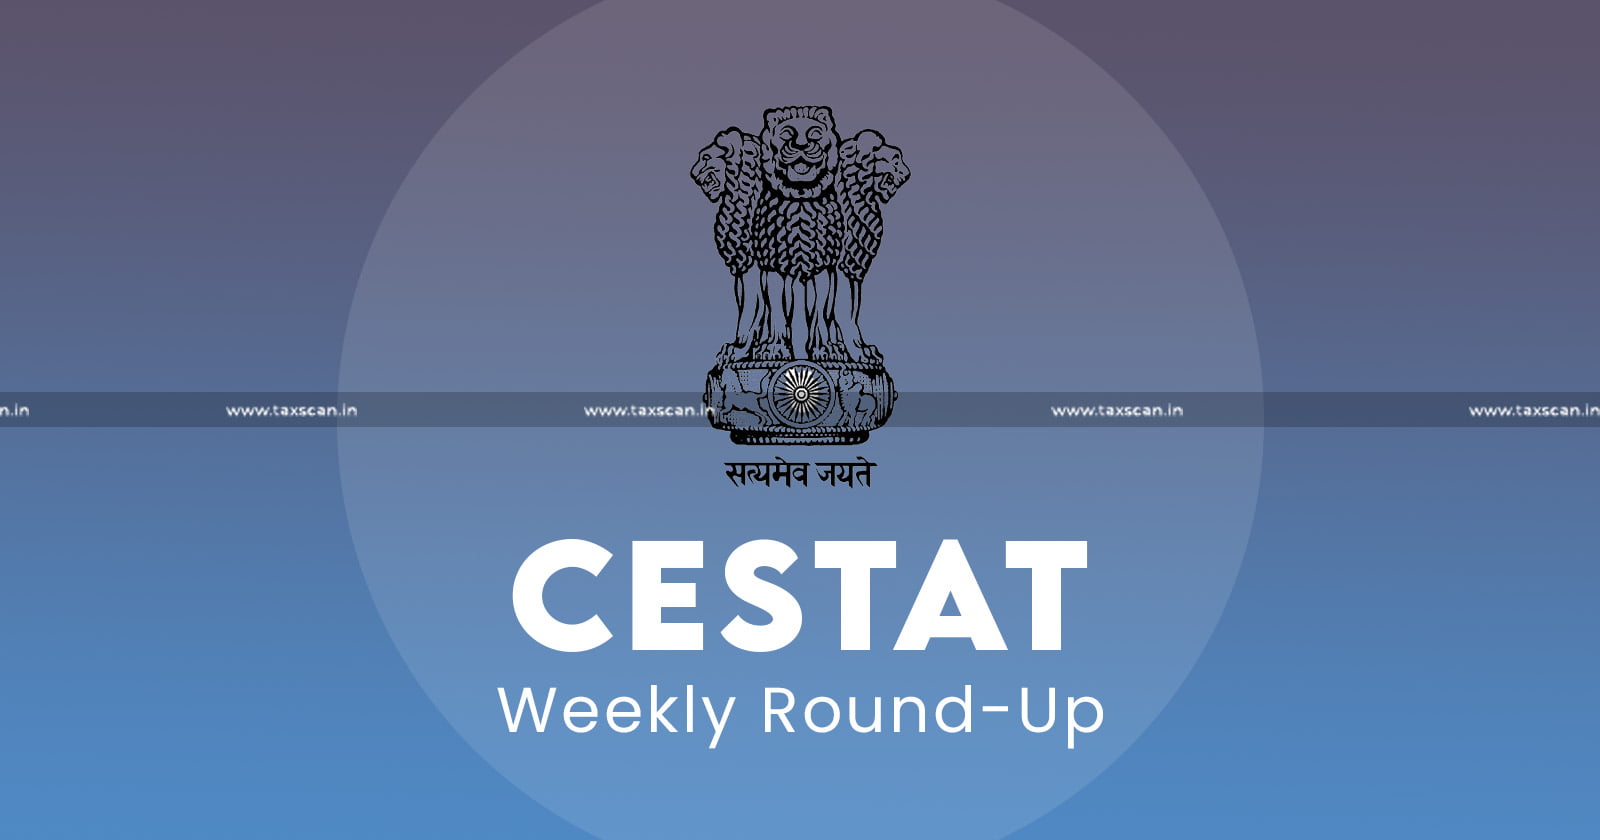 CESTAT - Weekly Round Up - CESTAT Weekly News - taxscan